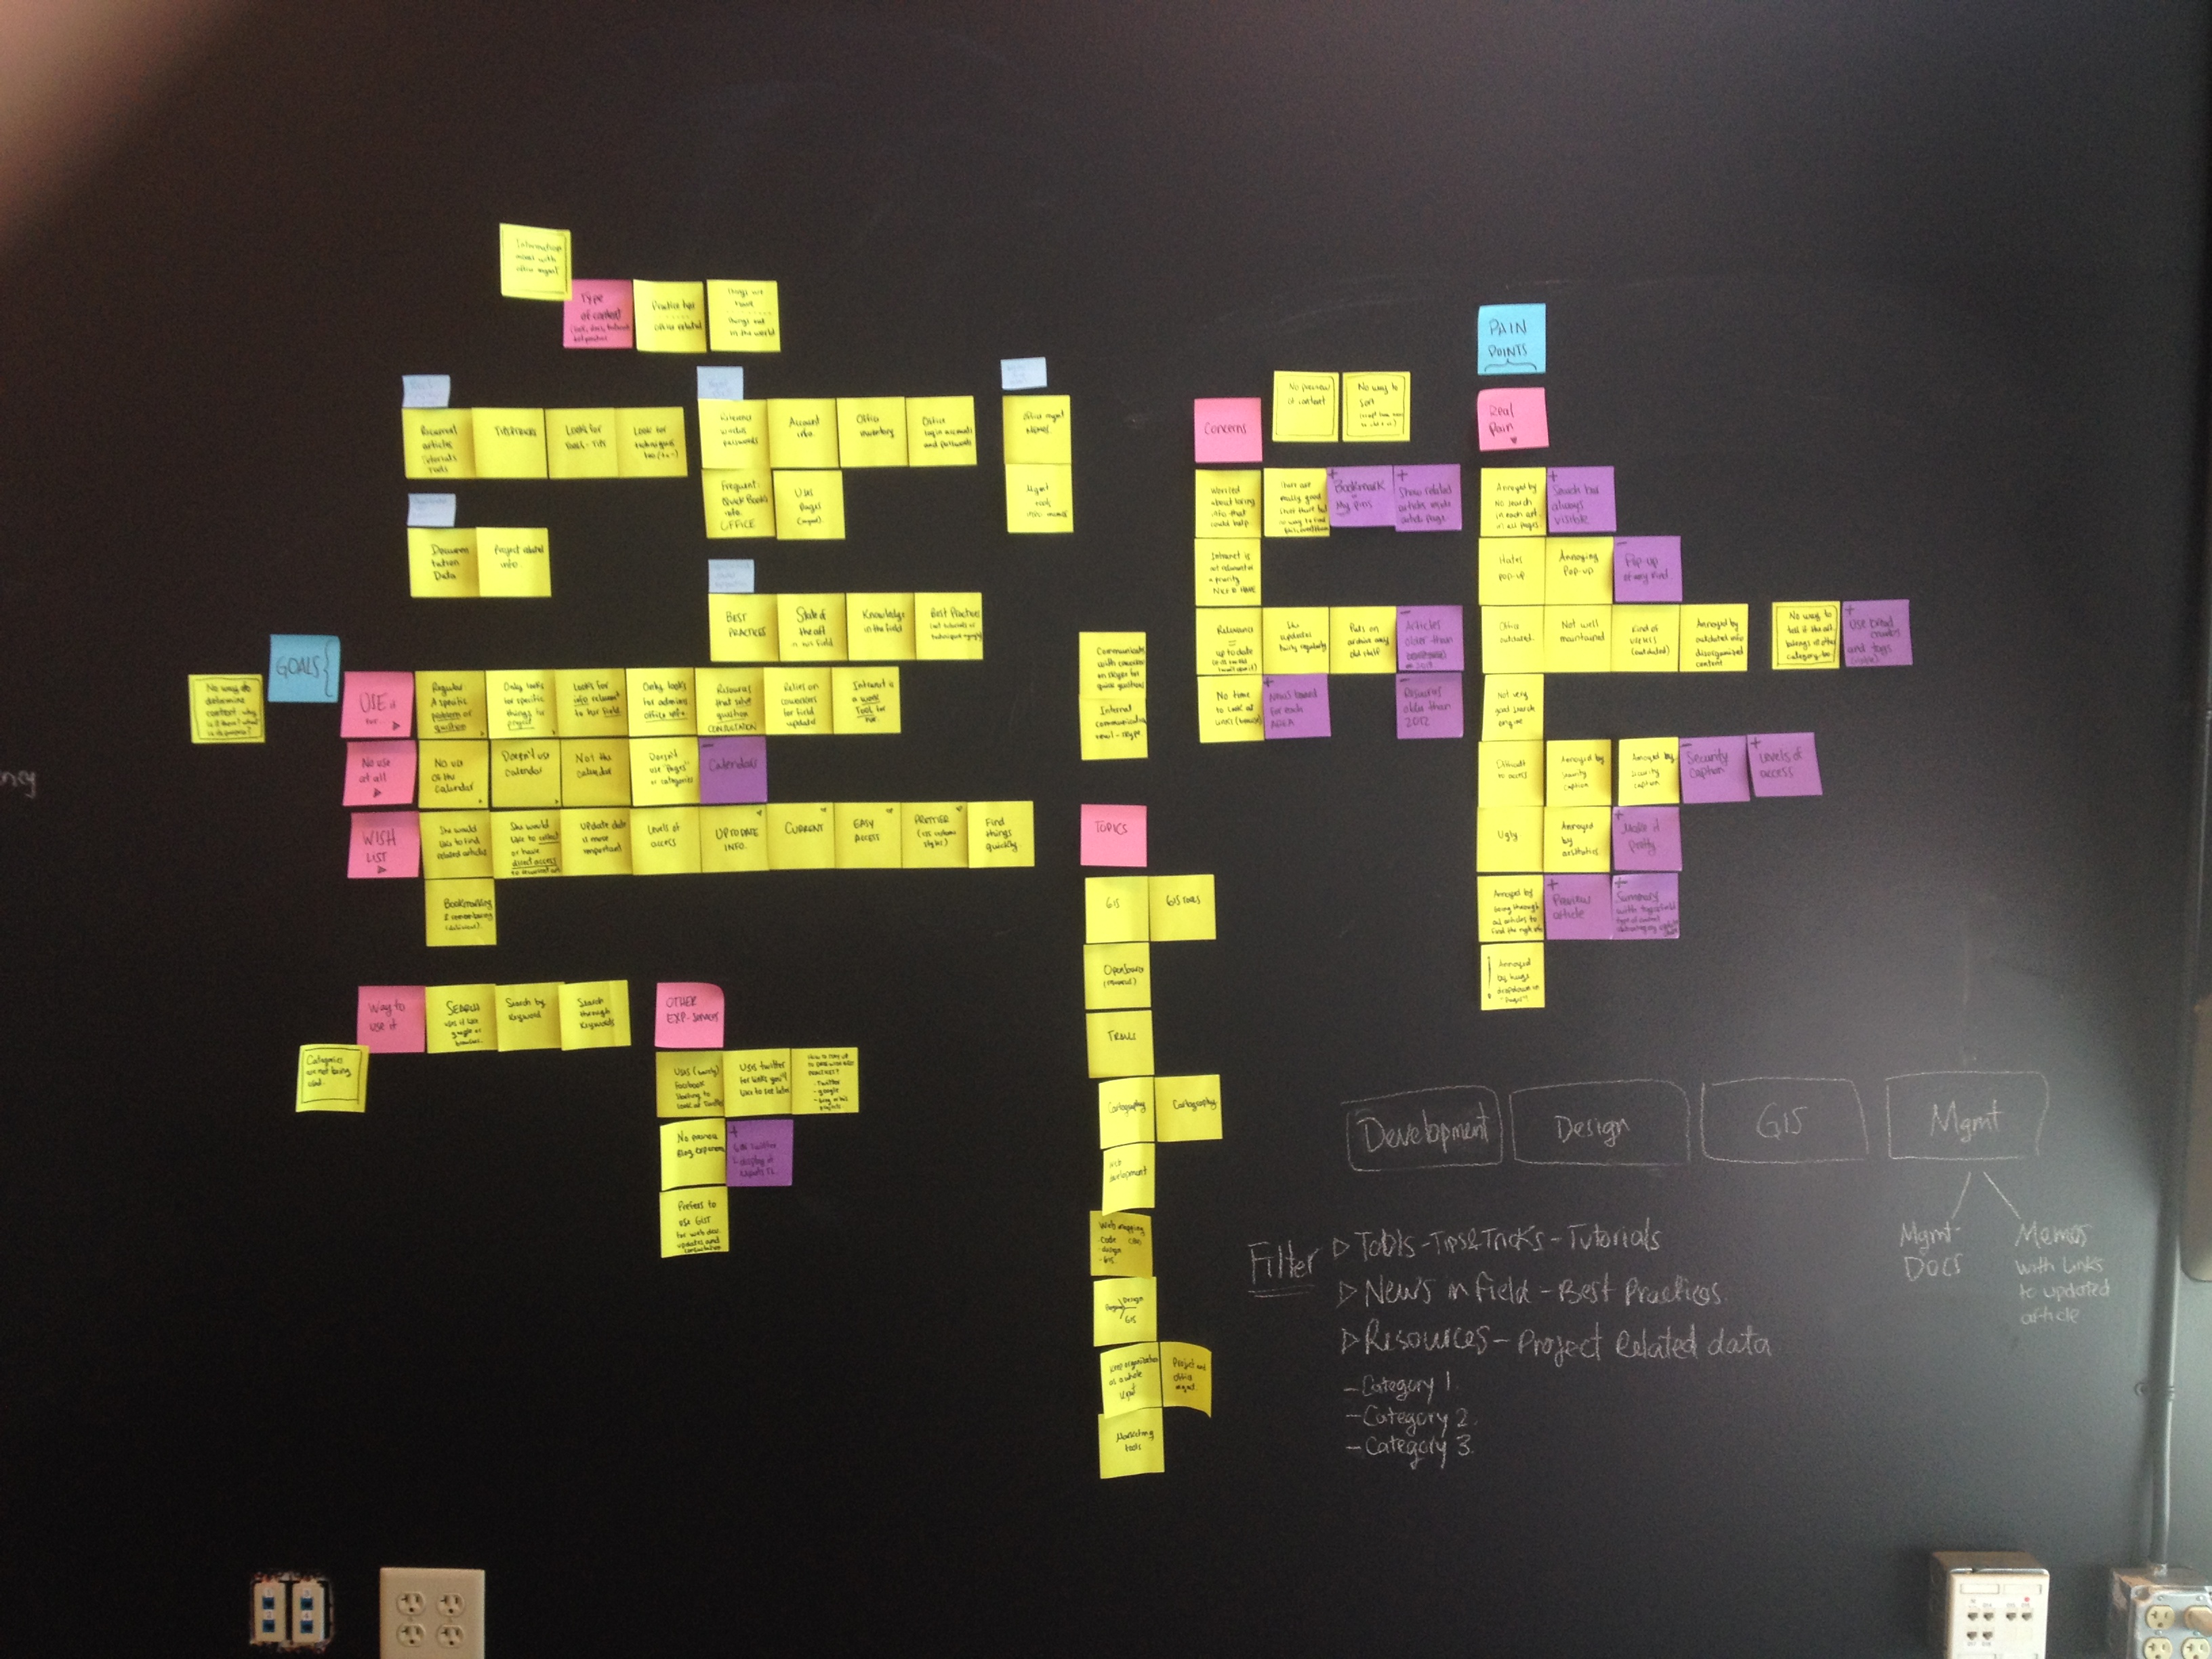 Image of the affinity diagram made in the wall